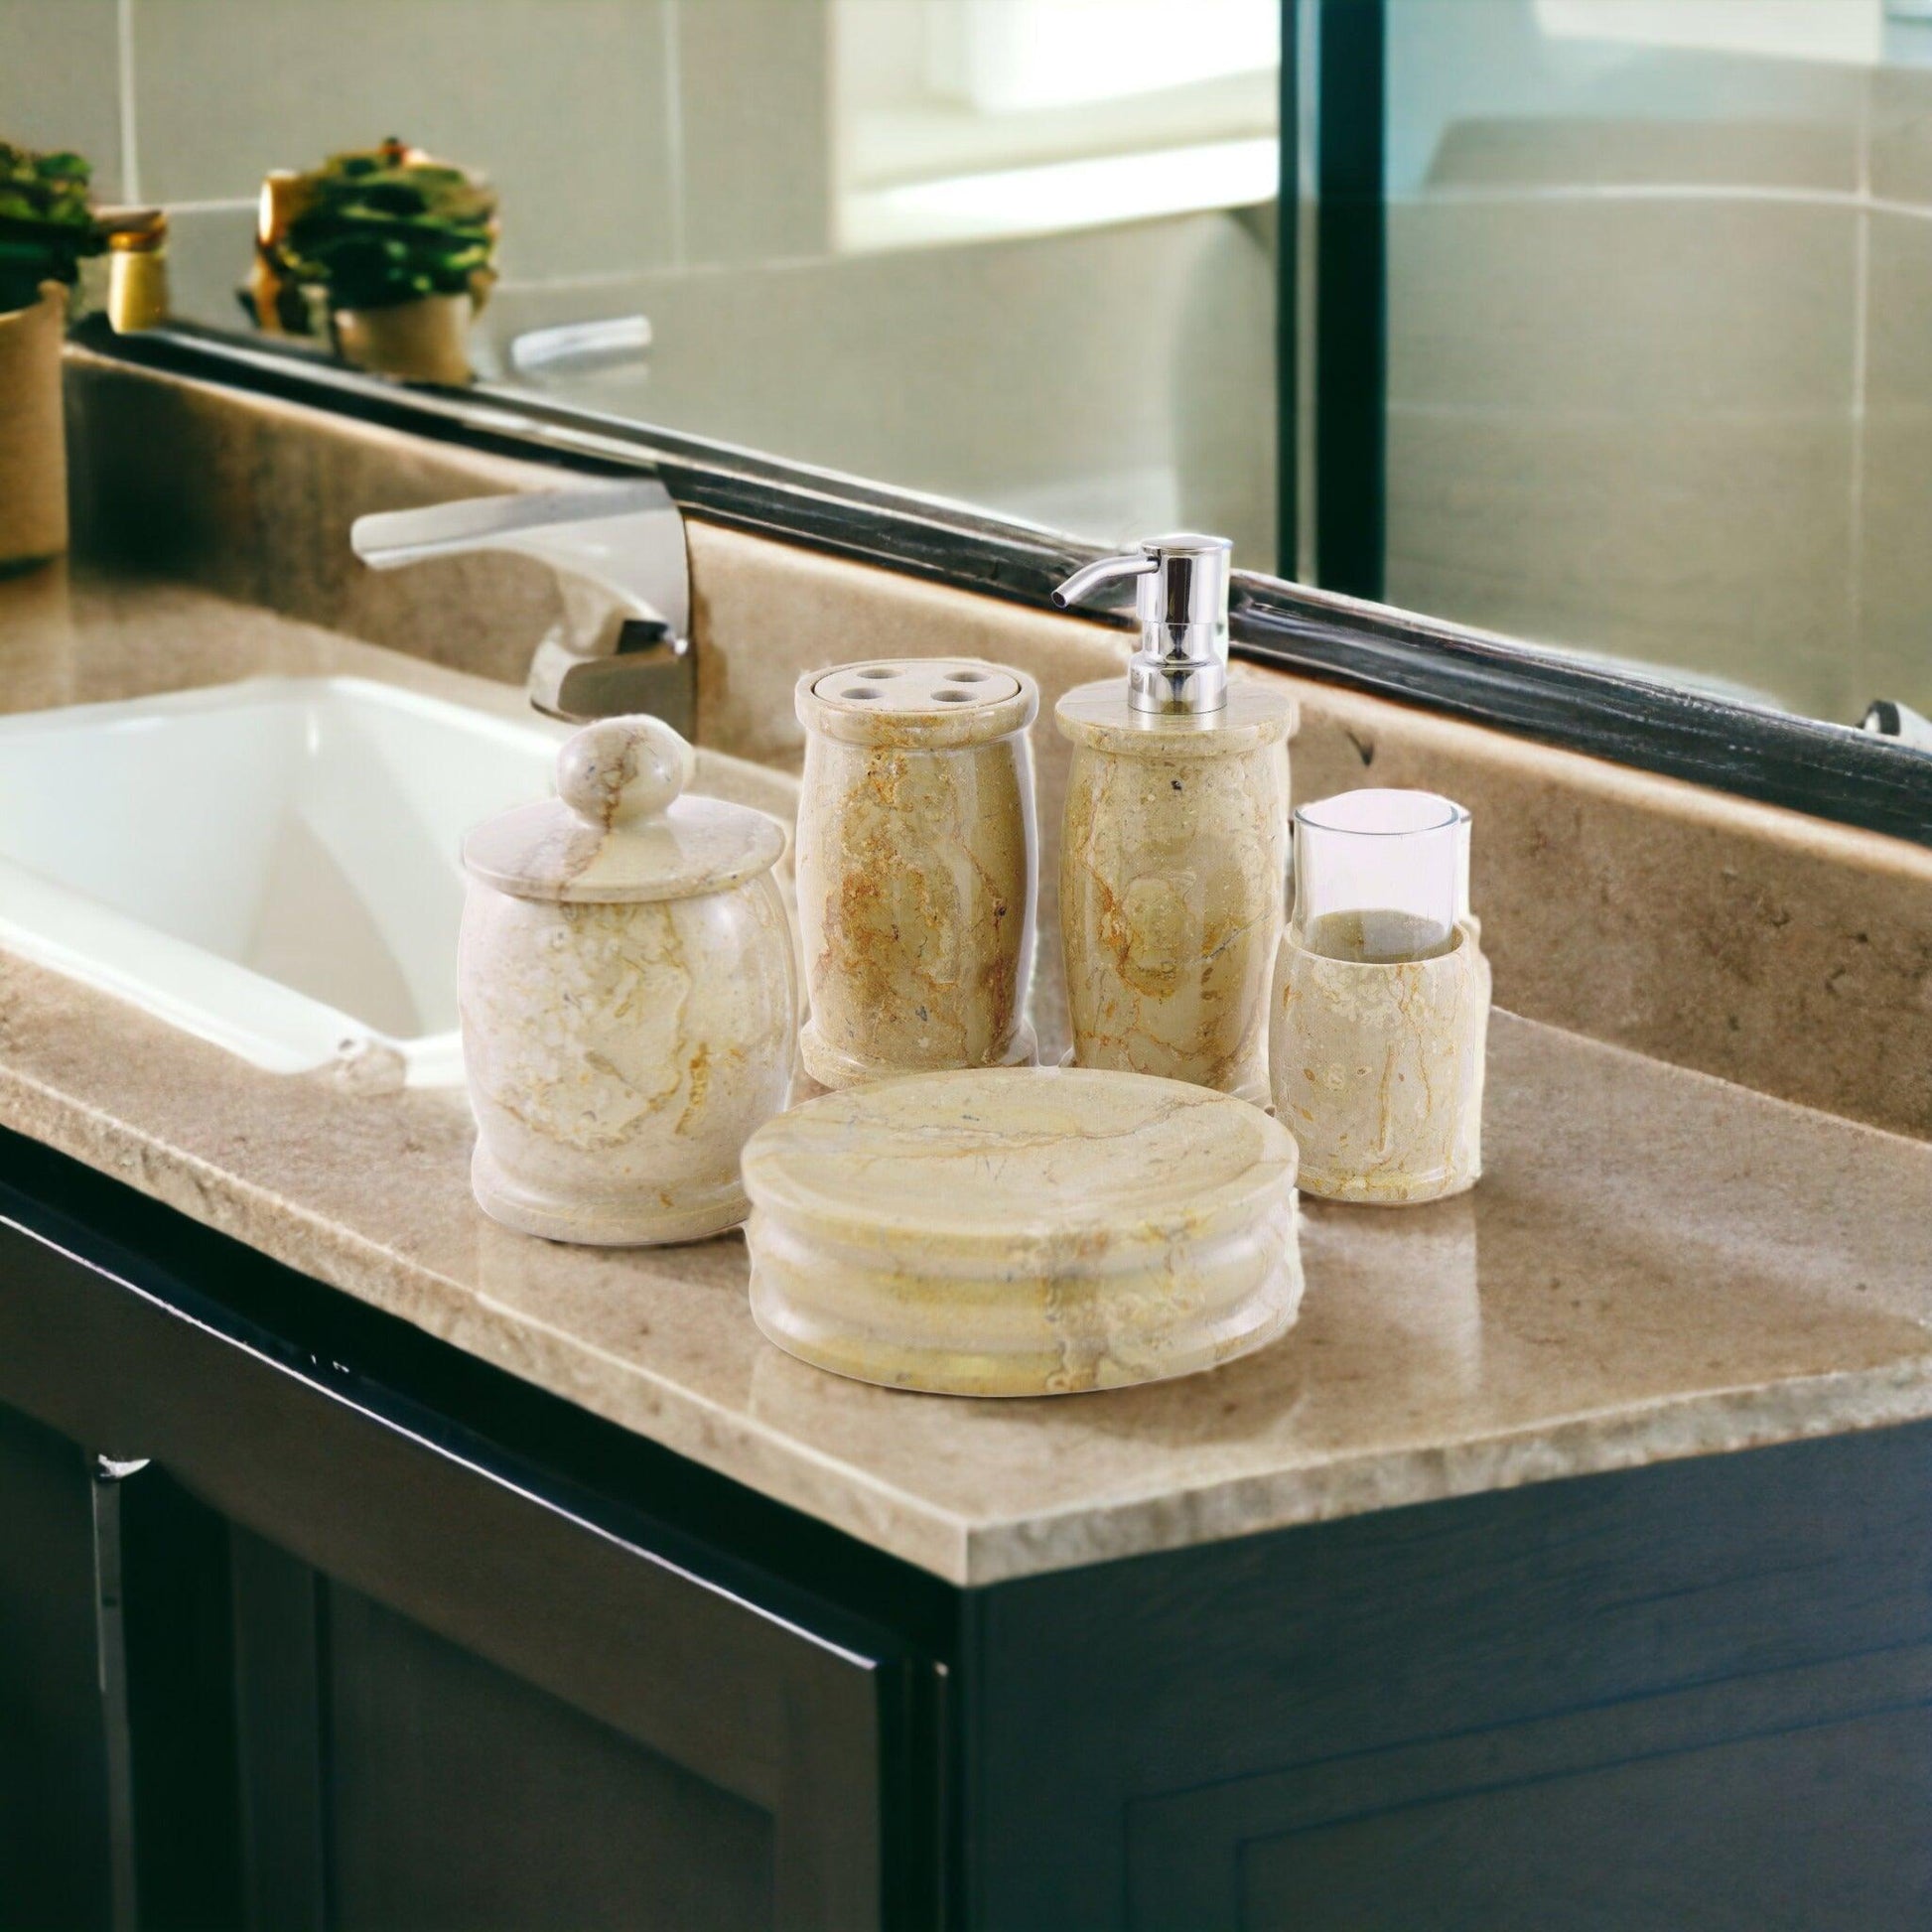 Elegant Bathroom Accessory Set of Sahara Beige Marble - Pacific Collection - Nature Home Decor